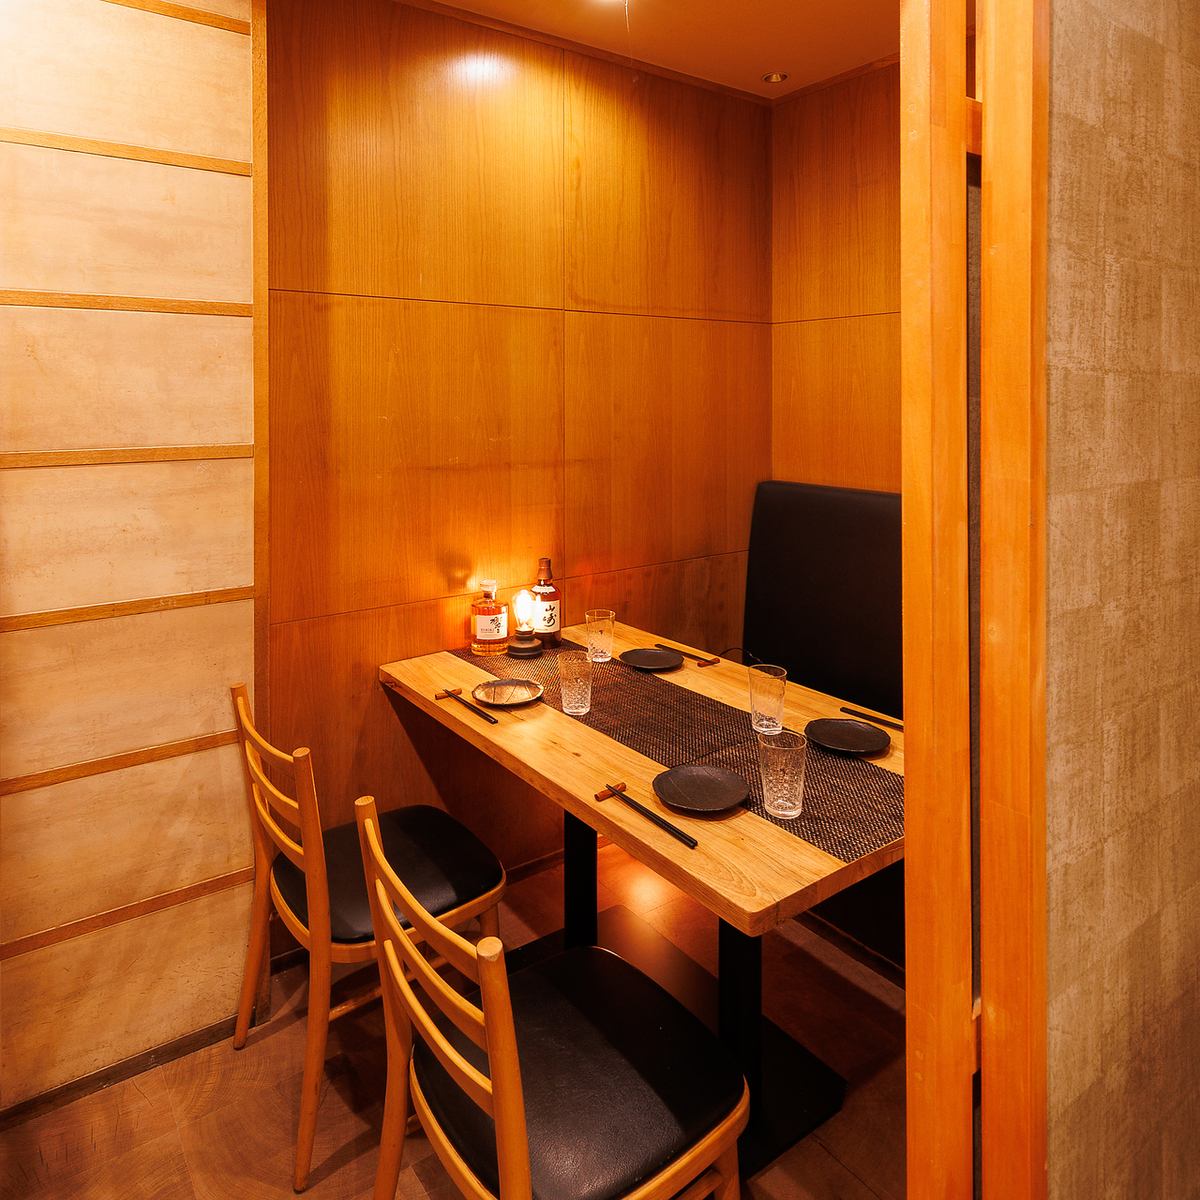 Private rooms are recommended! Private rooms are also available for small groups!